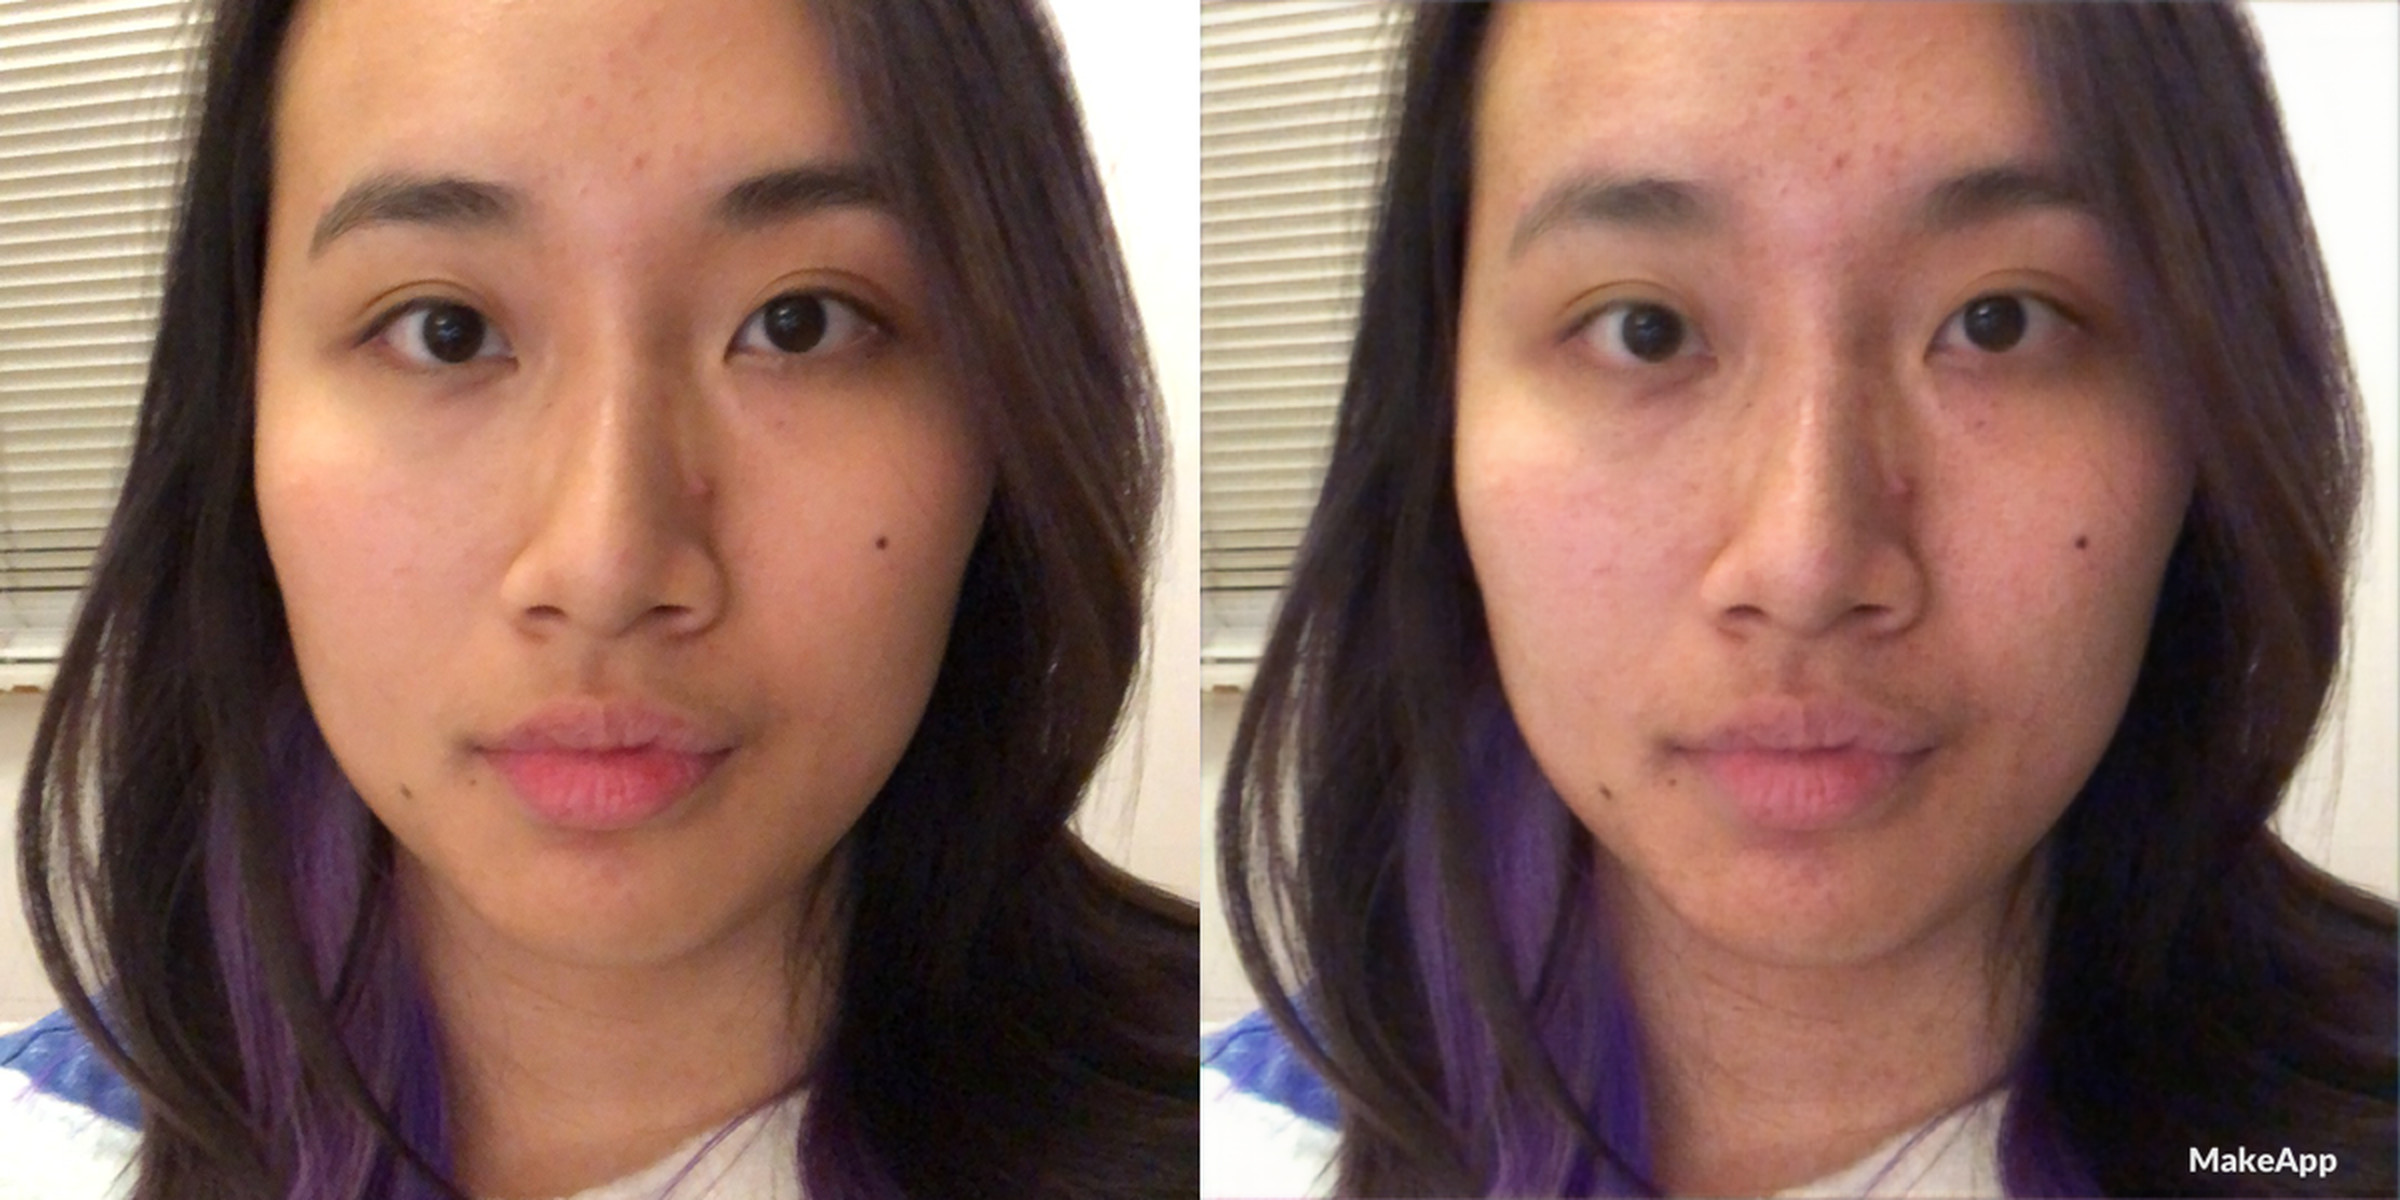 Left is my regular no-makeup face, right is after adding the Remove Makeup filter.